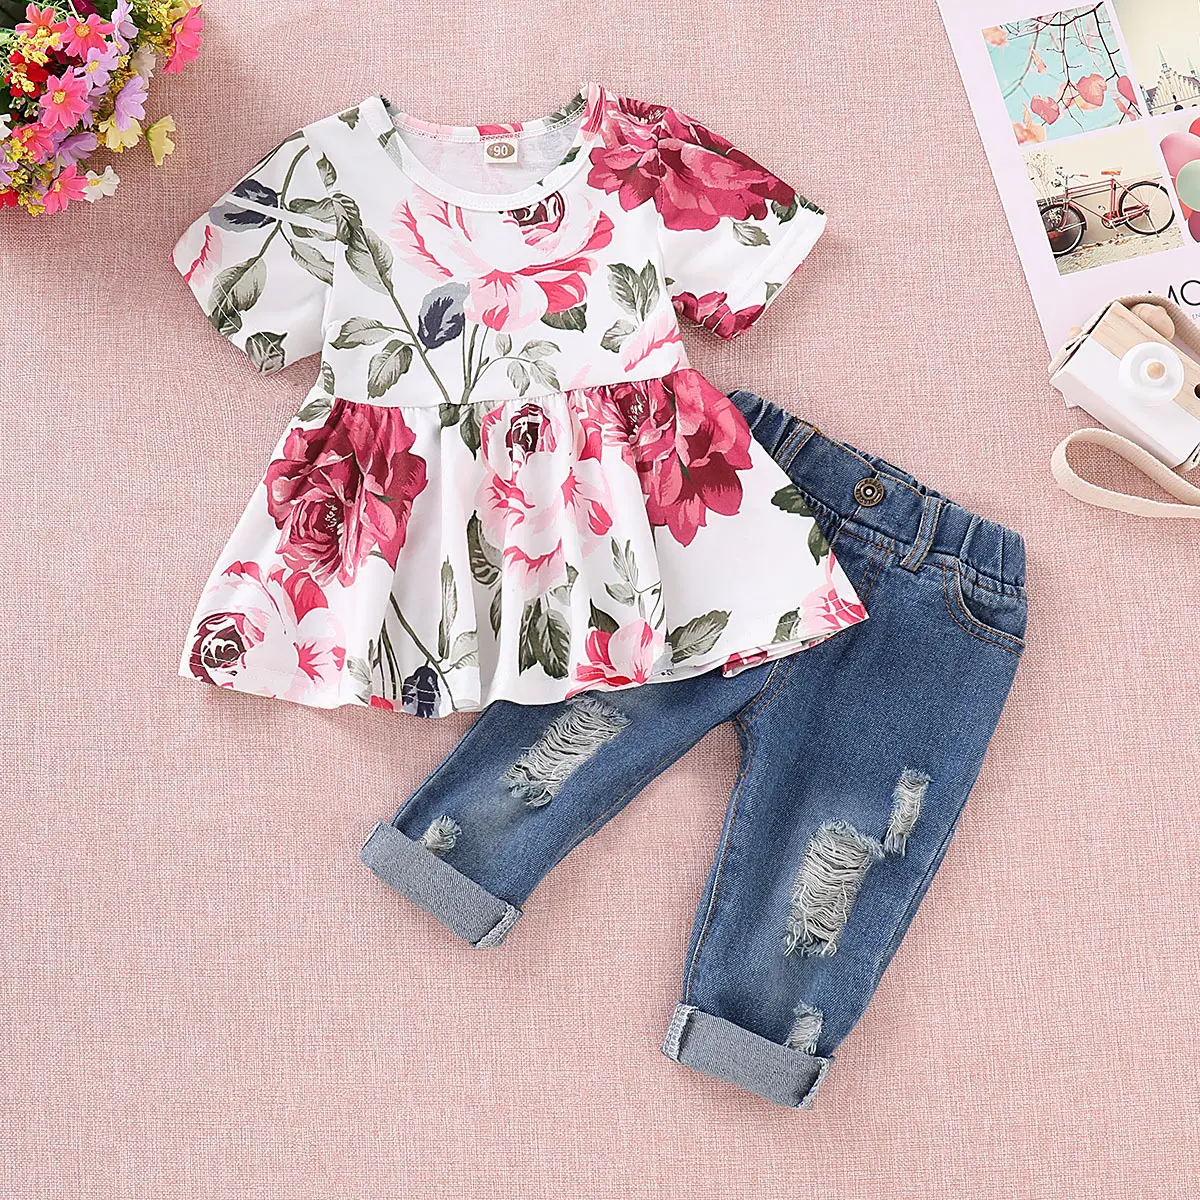 Hot sale 2021 Summer Popular Fashion baby Girls Print ruffle Tops ripped jeans denim Trousers Clothing sets